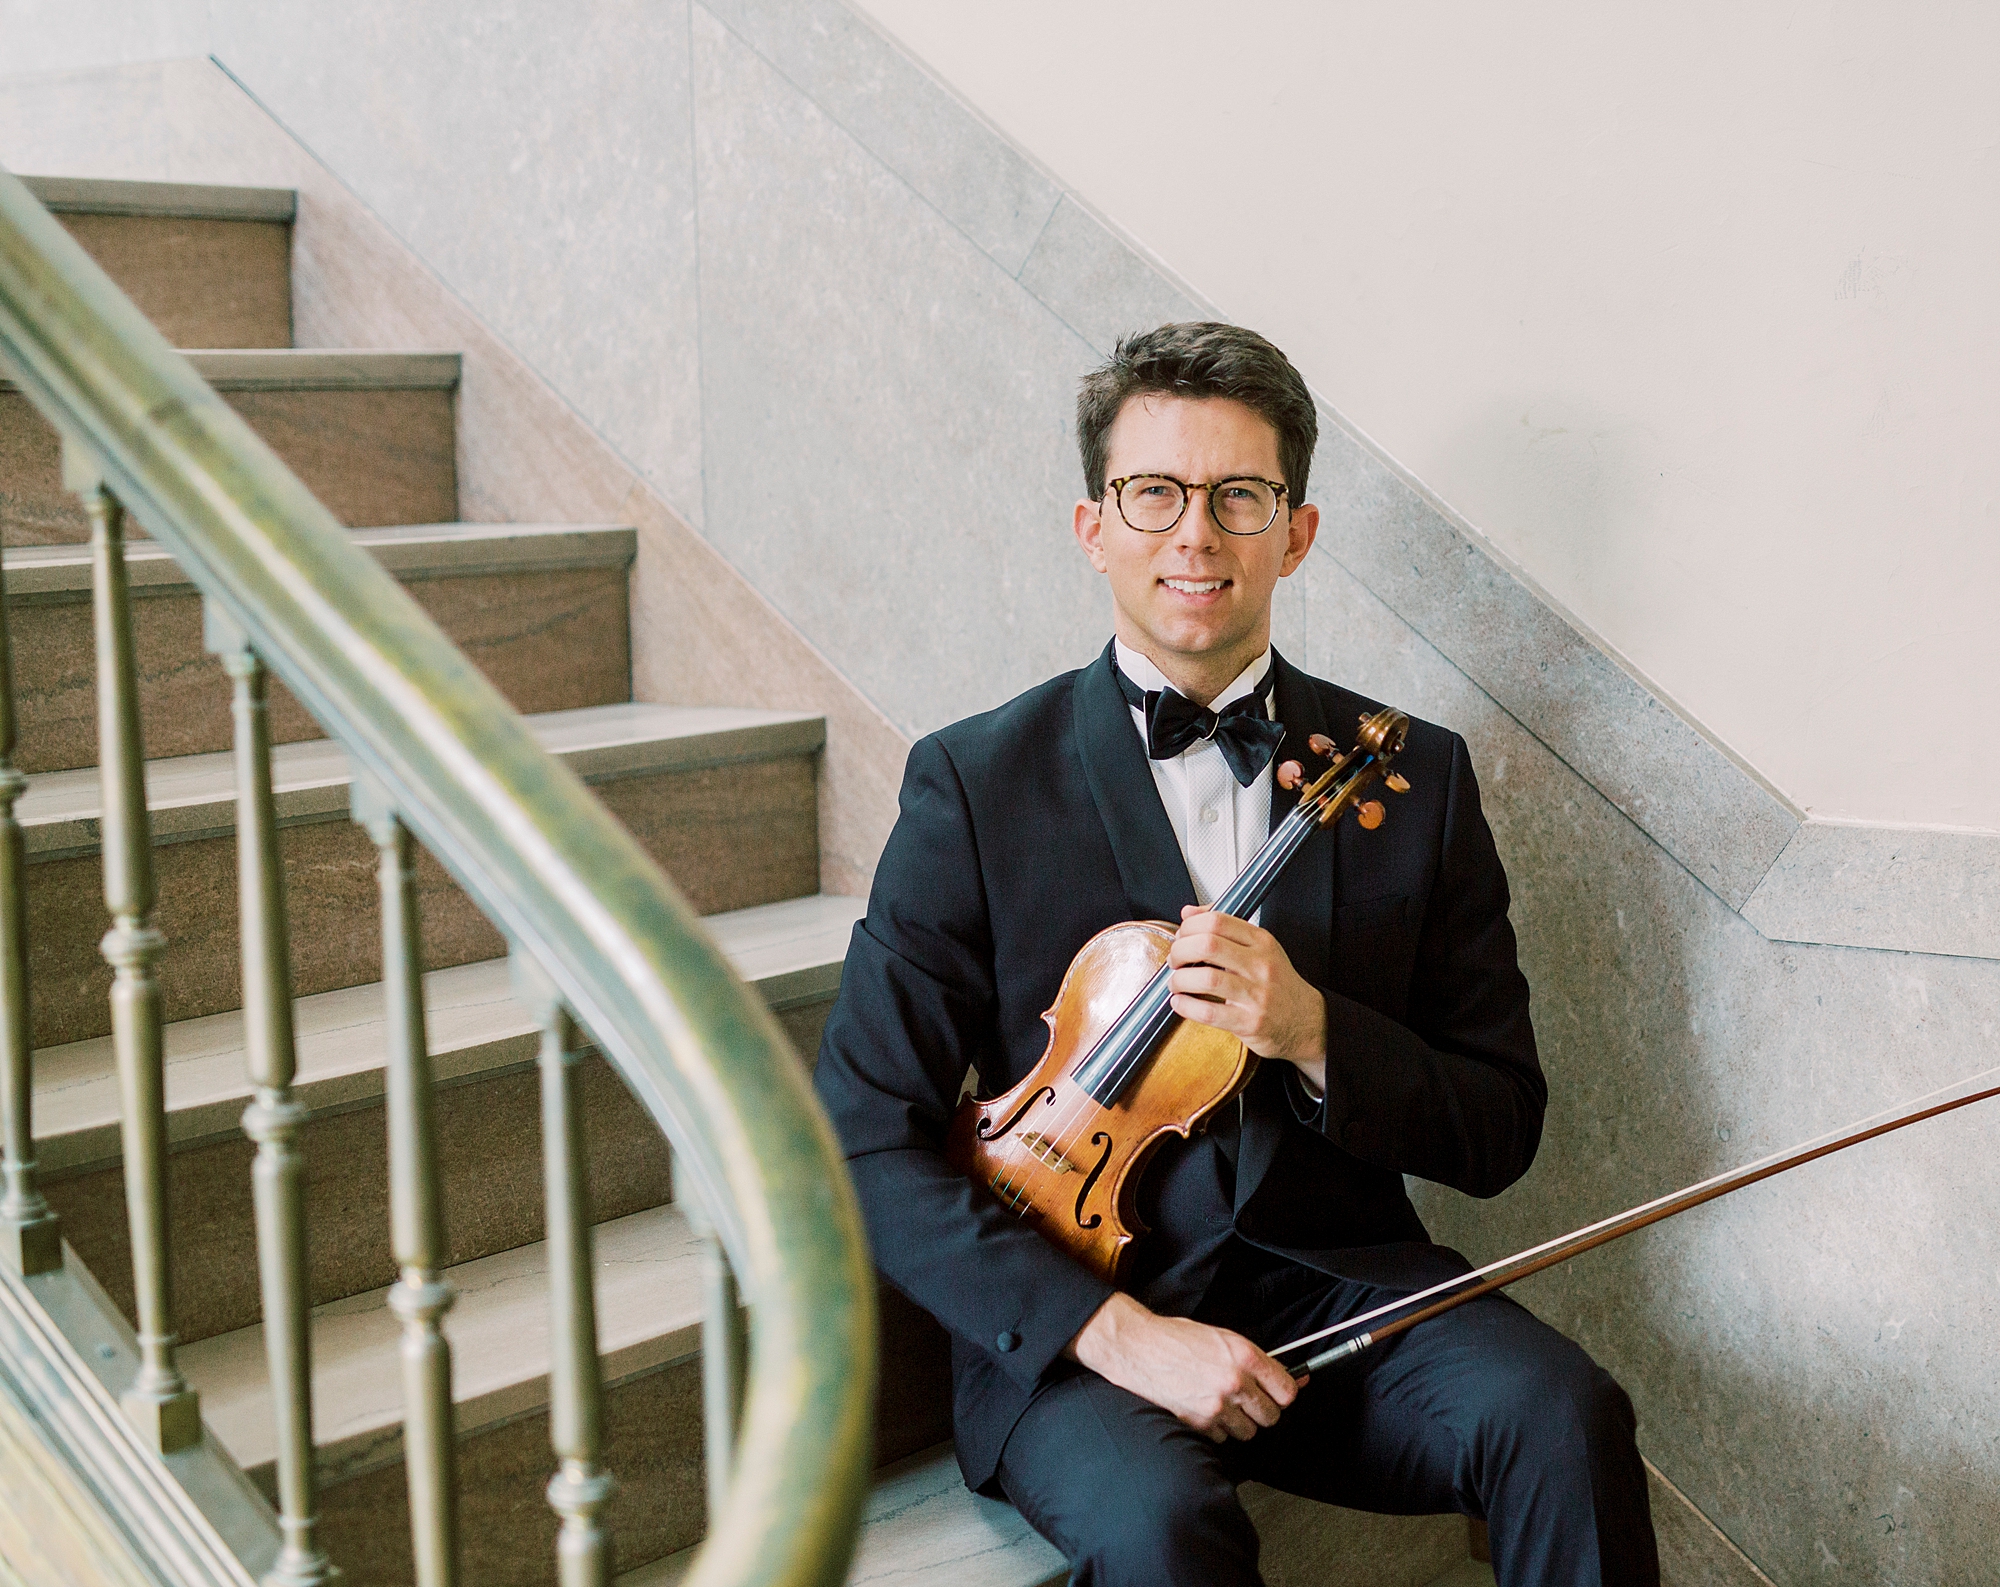 violin player sits on steps holding violin under his arm